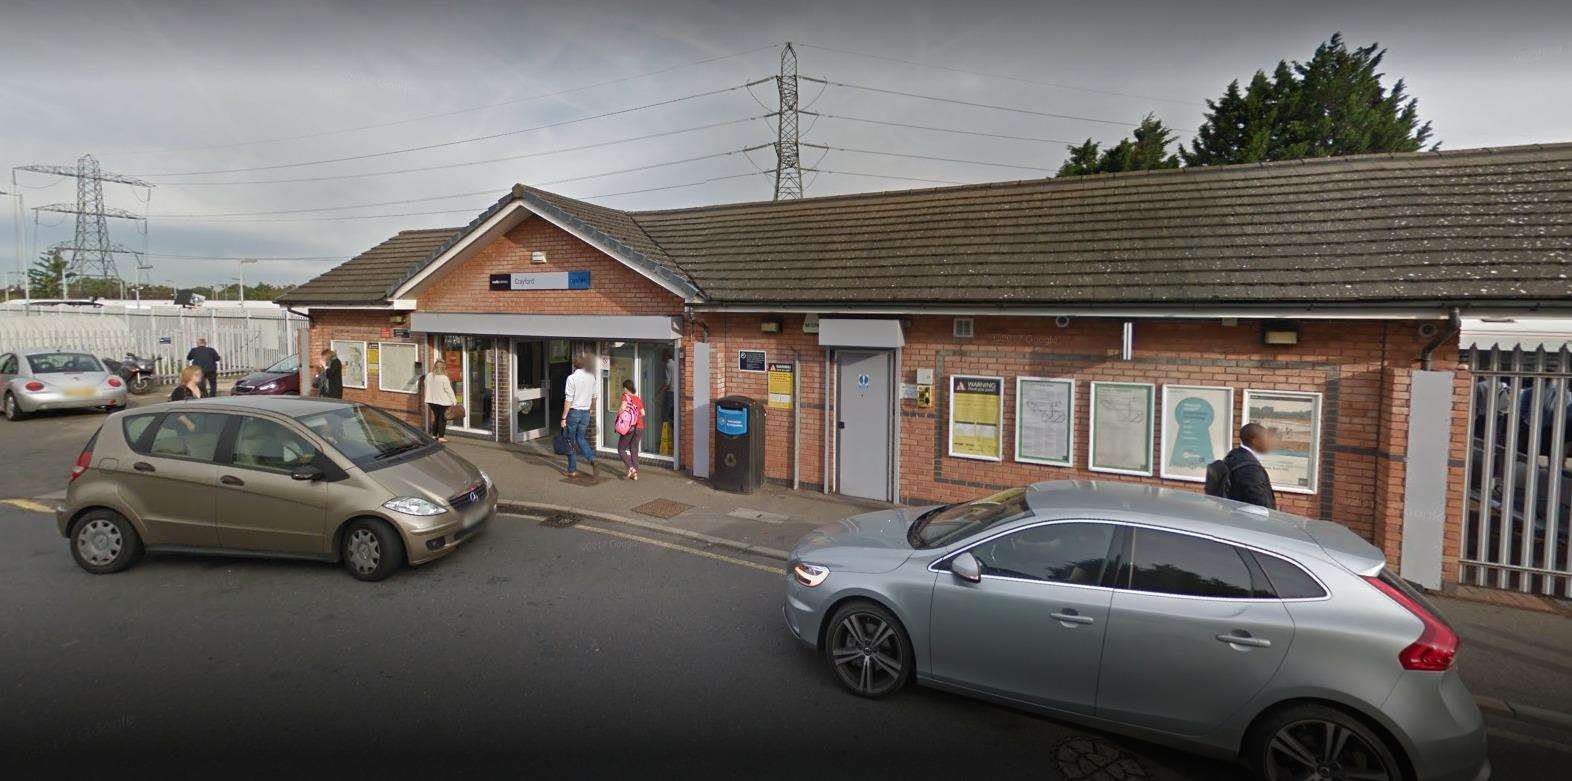 A man was hit by a train at Crayford Station.